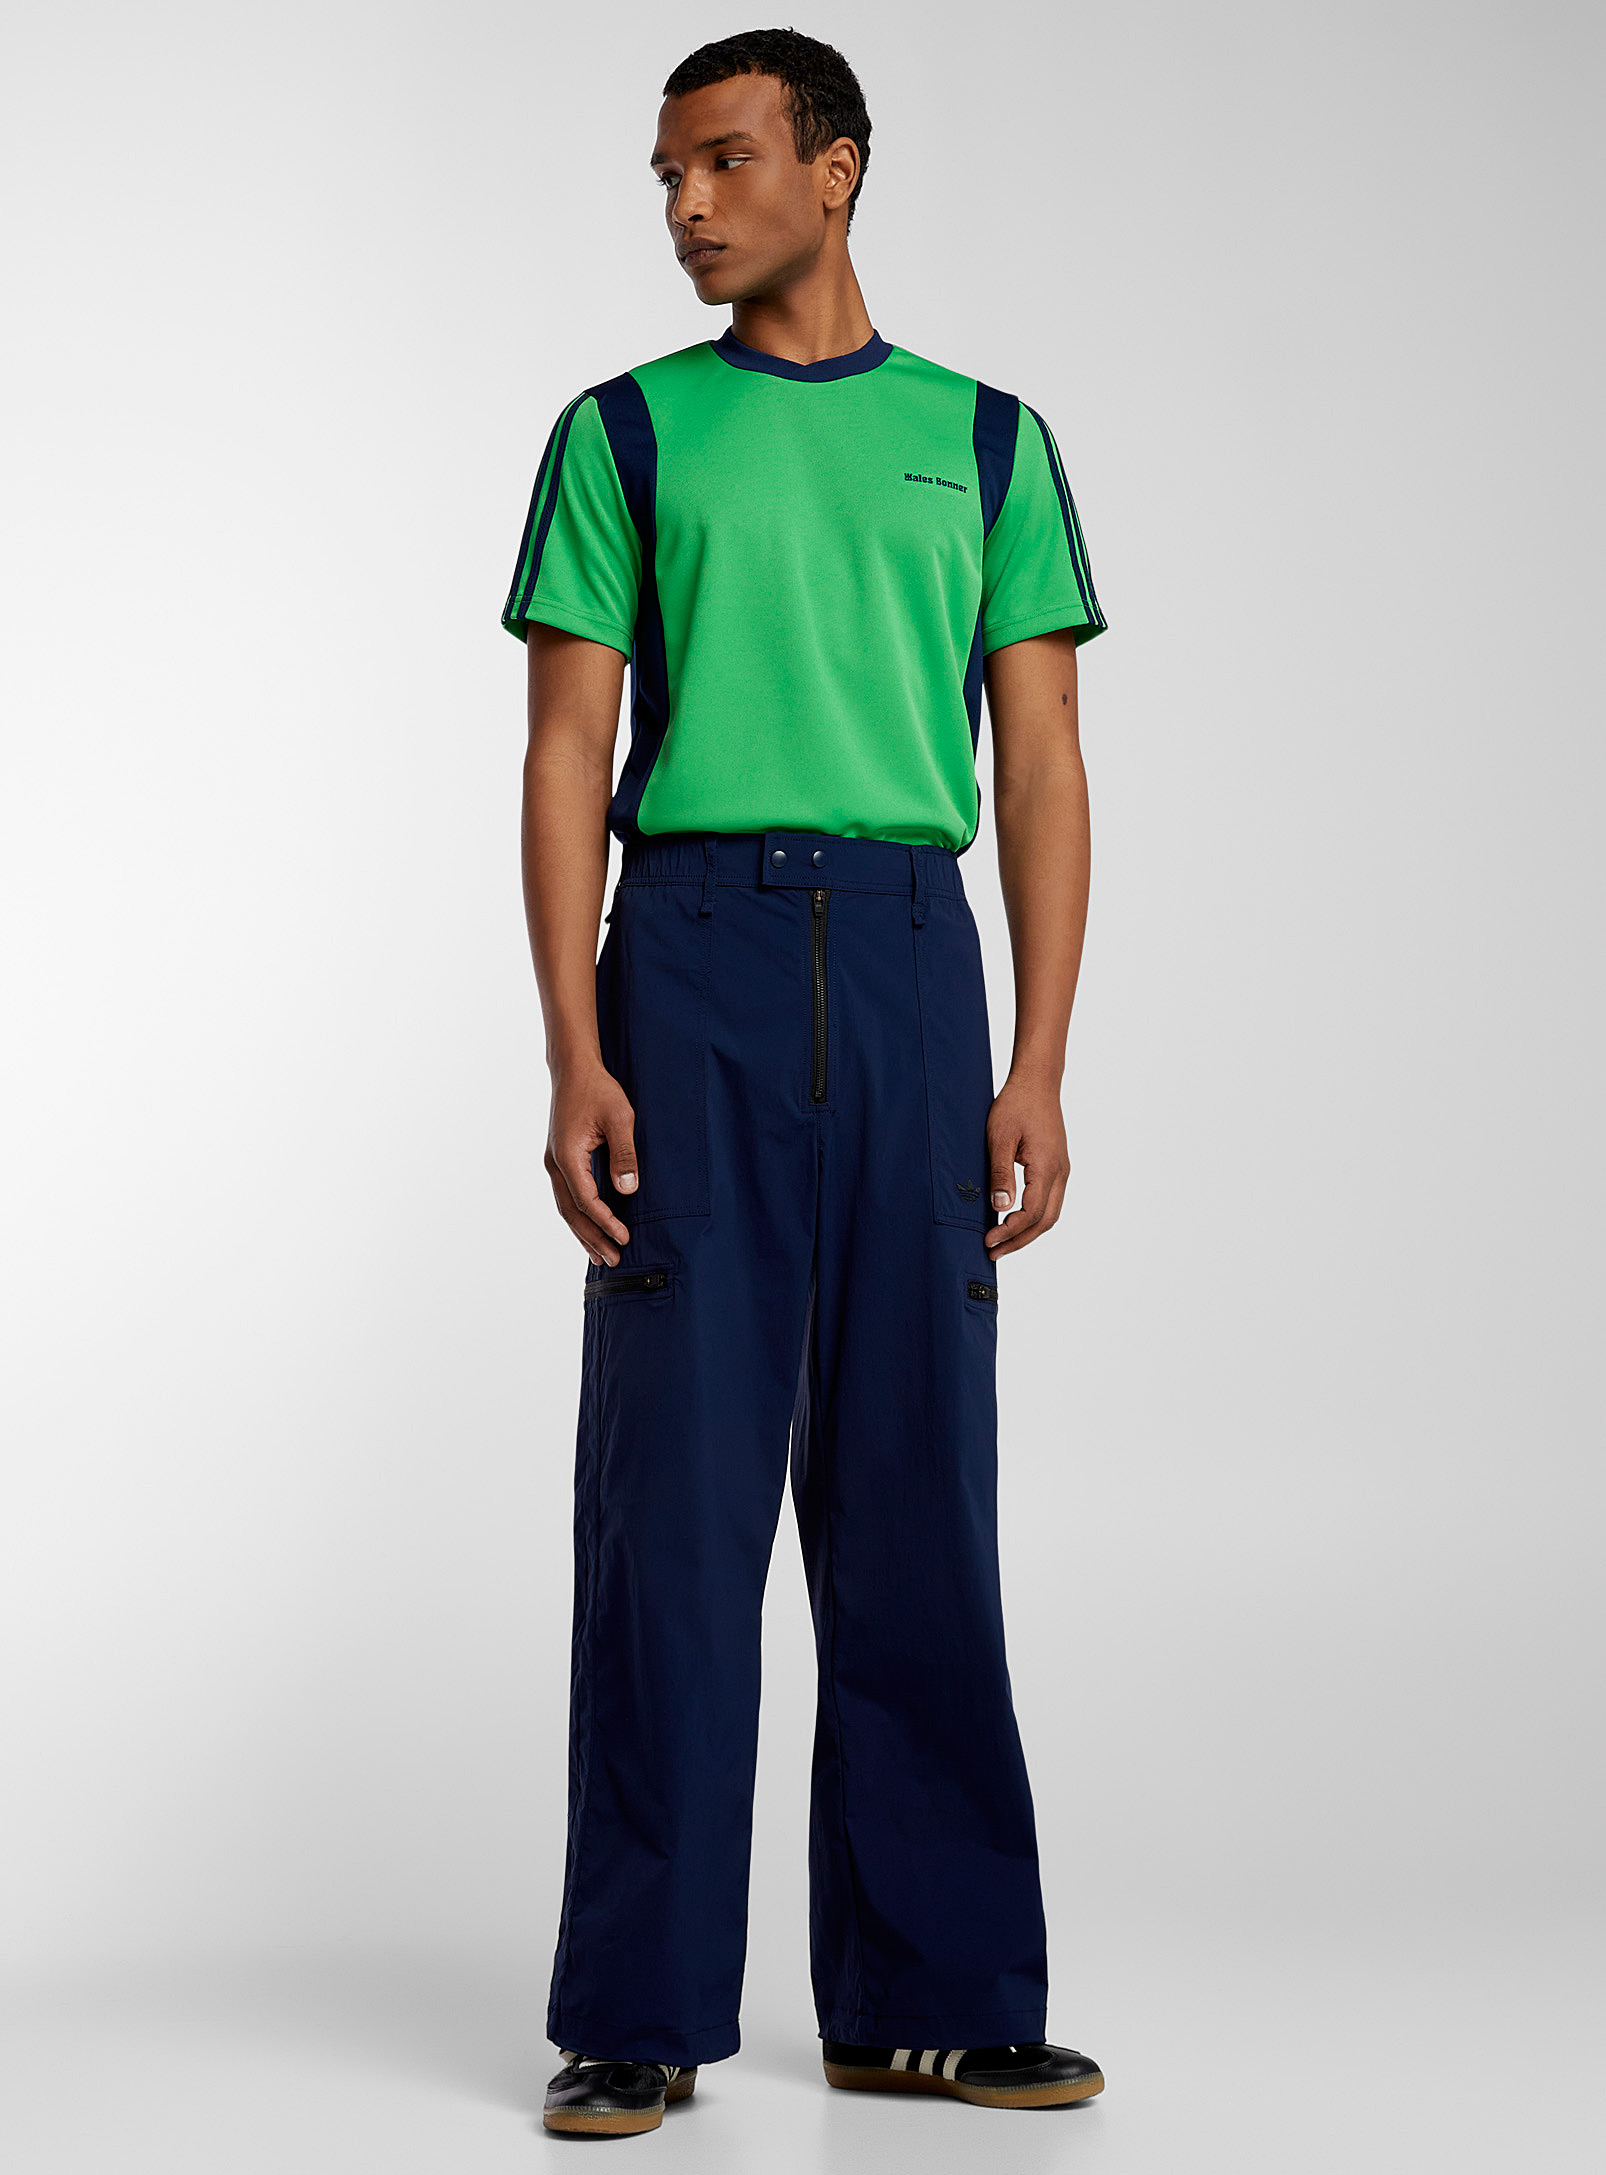 Adidas X Wales Bonner Statement Cargo Pant In Marine Blue